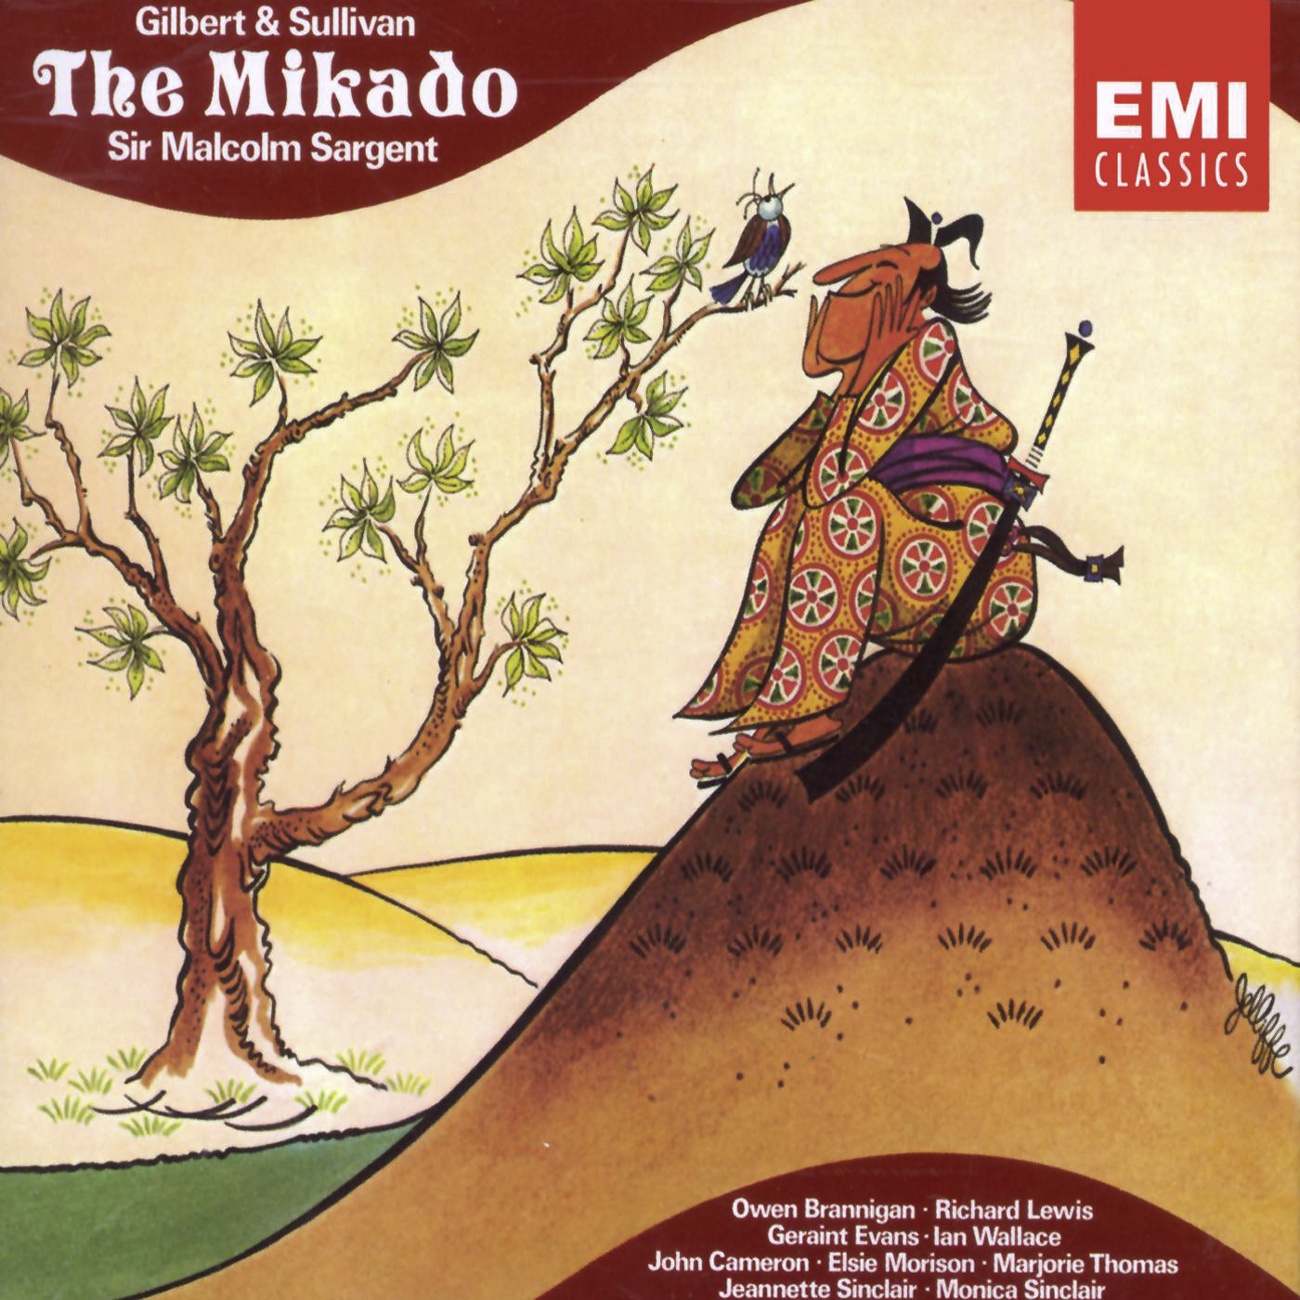 The Mikado (or, The Town of Titipu), Act II: The sun, whose rays are all ablaze (Yum-Yum)